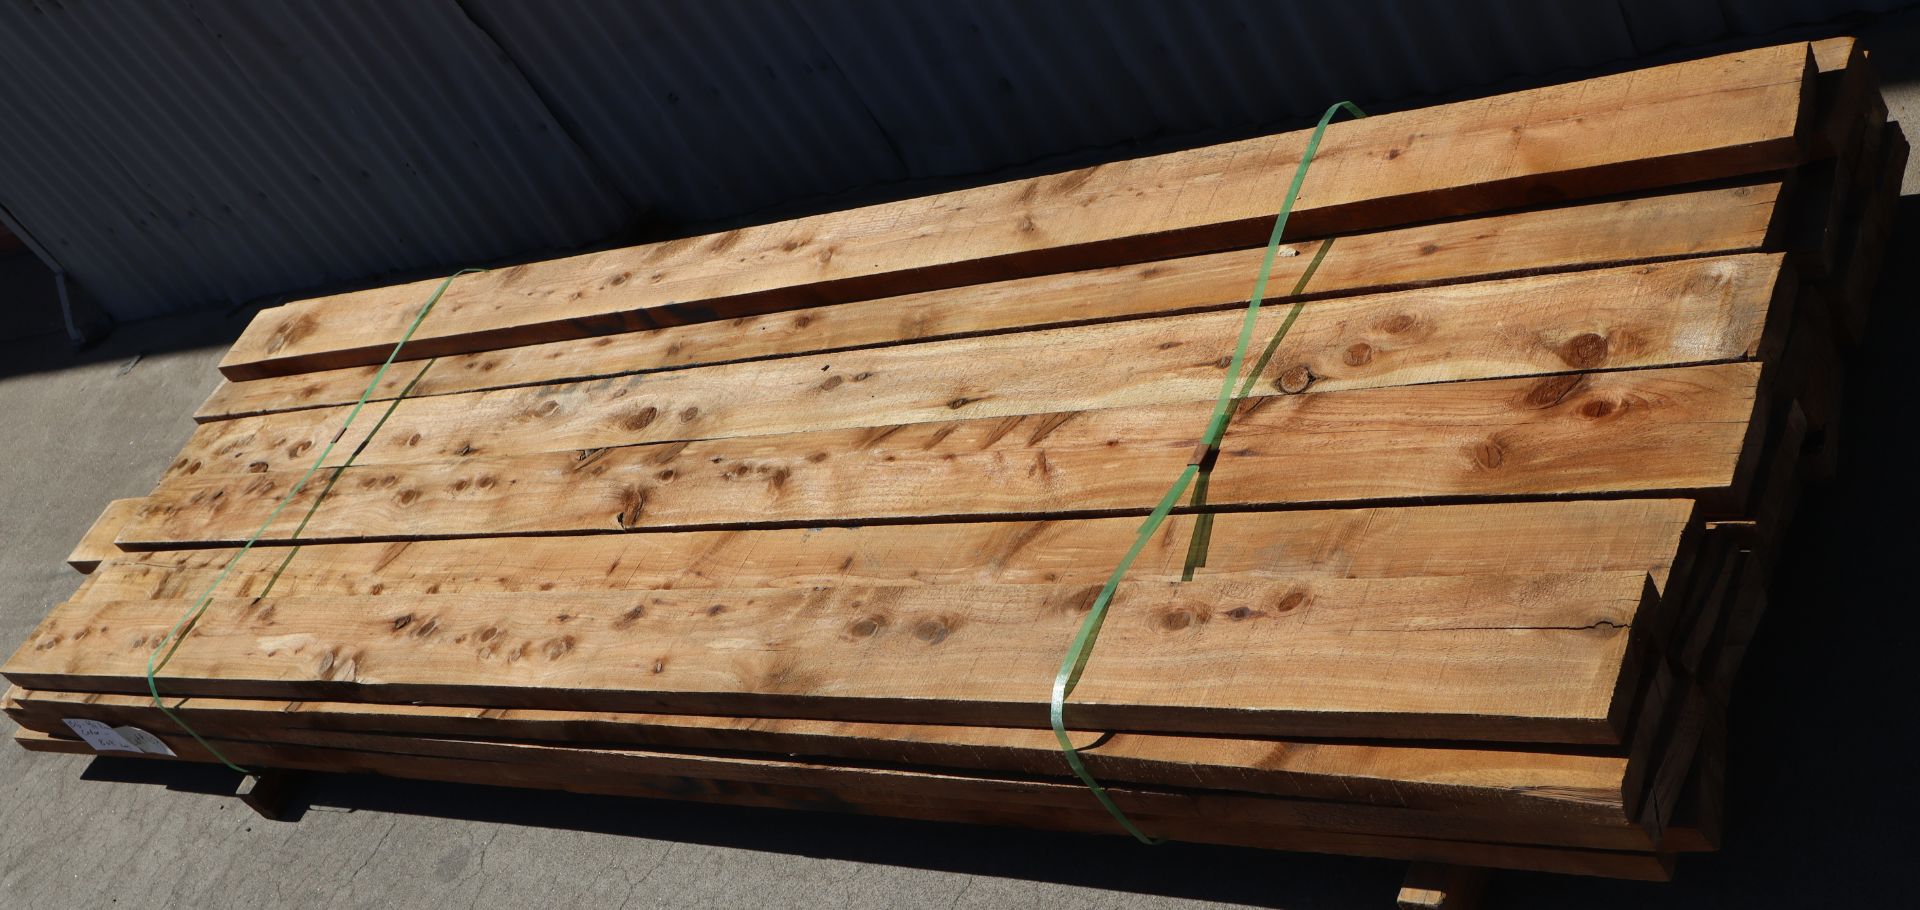 156' BFT-6/4 Aromatic Cedar, 8' to 9' Long - Image 2 of 4